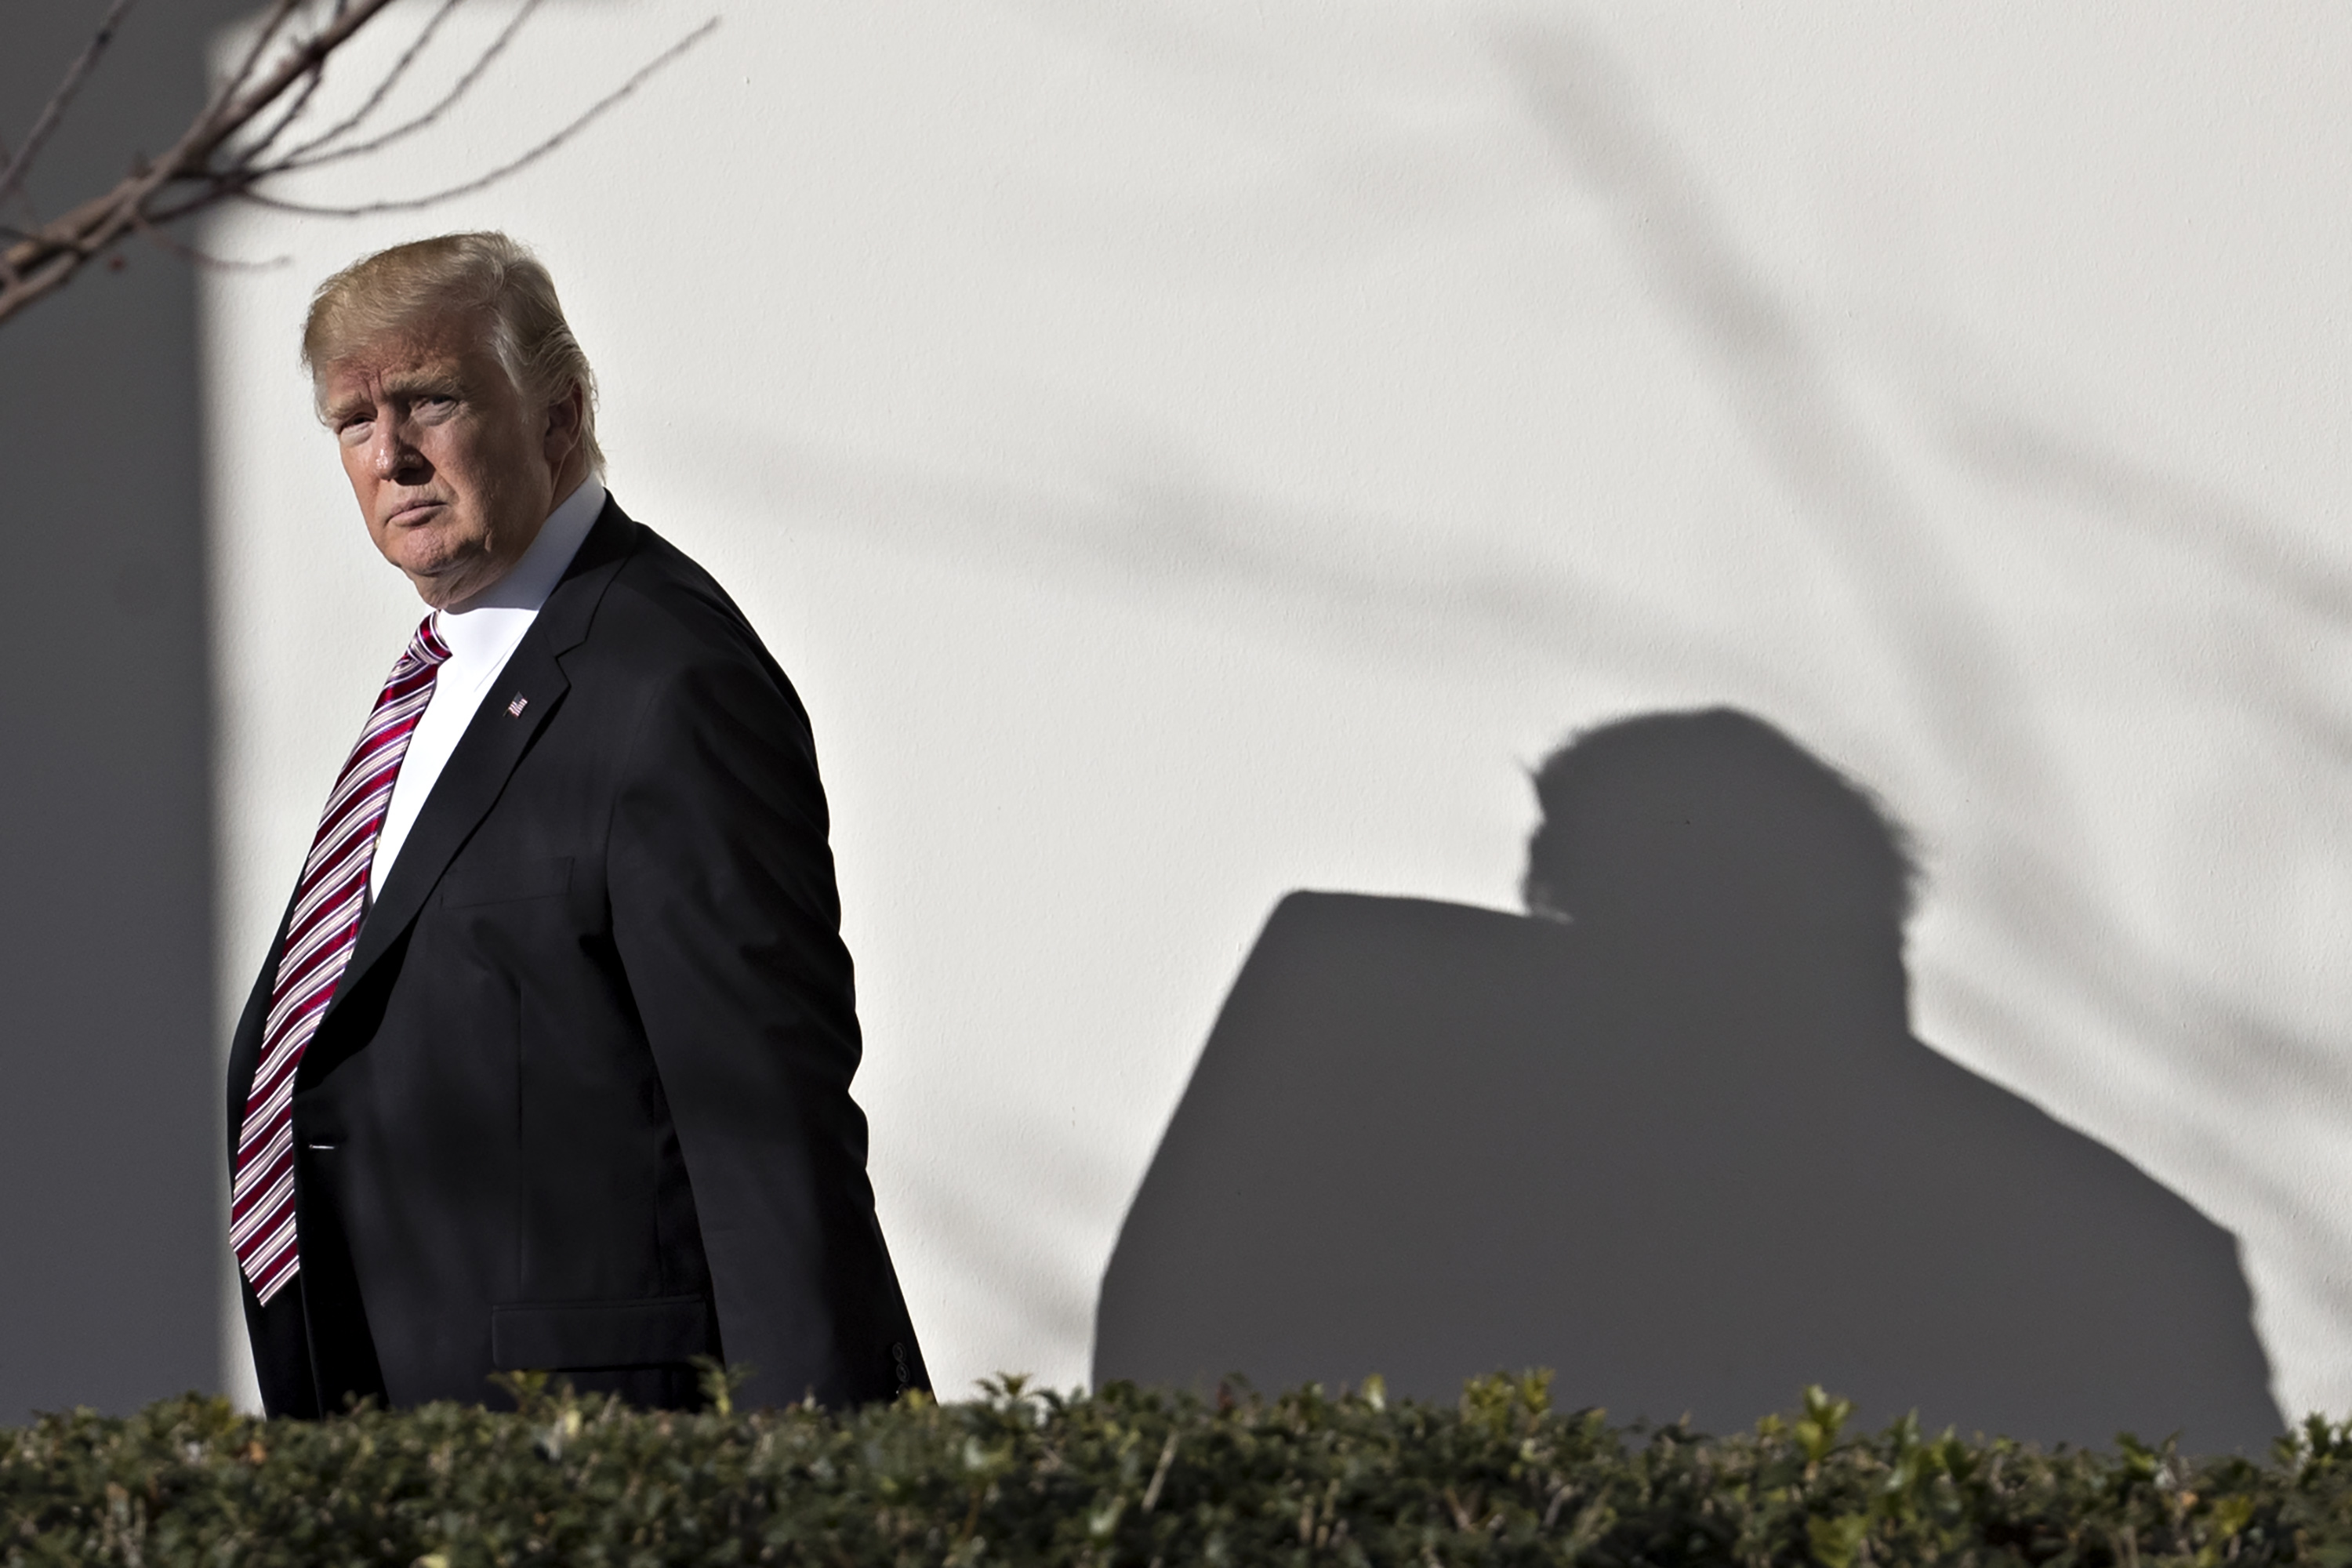 President Trump walks towards the Oval Office through the West Wing Colonnade of the White House, on Jan. 27, 2017. (Bloomberg—Getty Images)